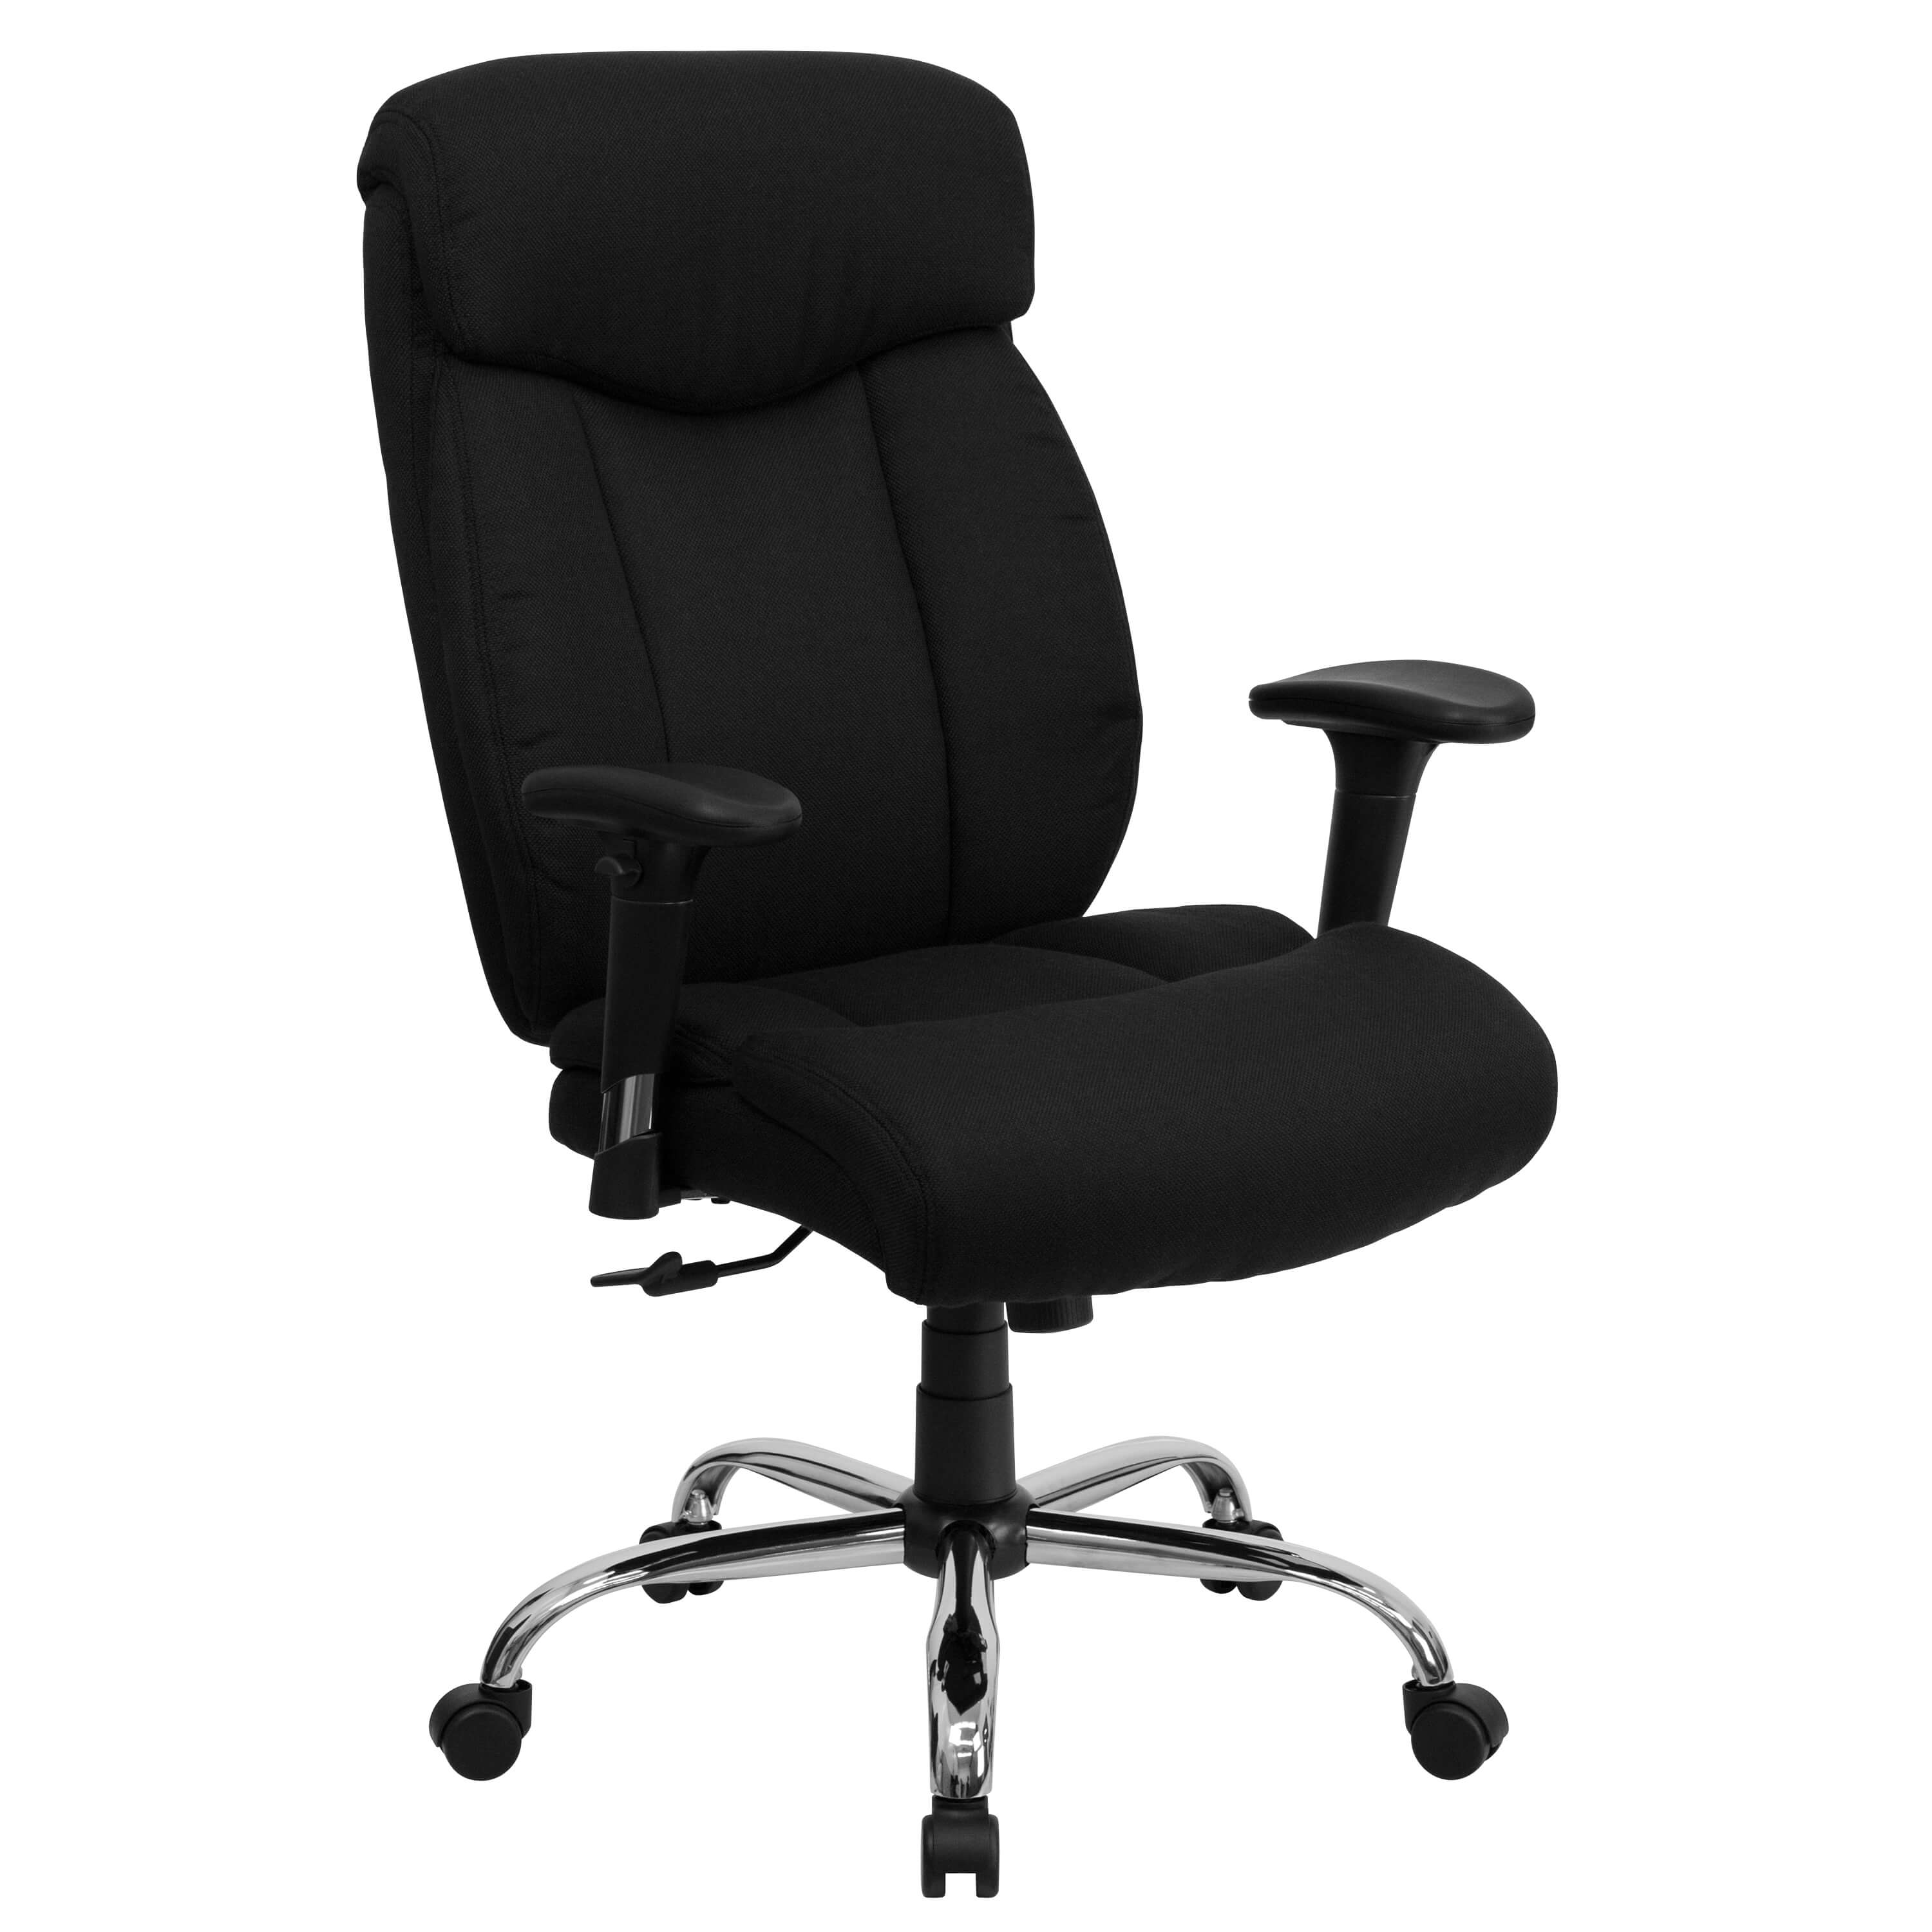 big-and-tall-office-chairs-heavy-duty-ergonomic-office-chairs.jpg